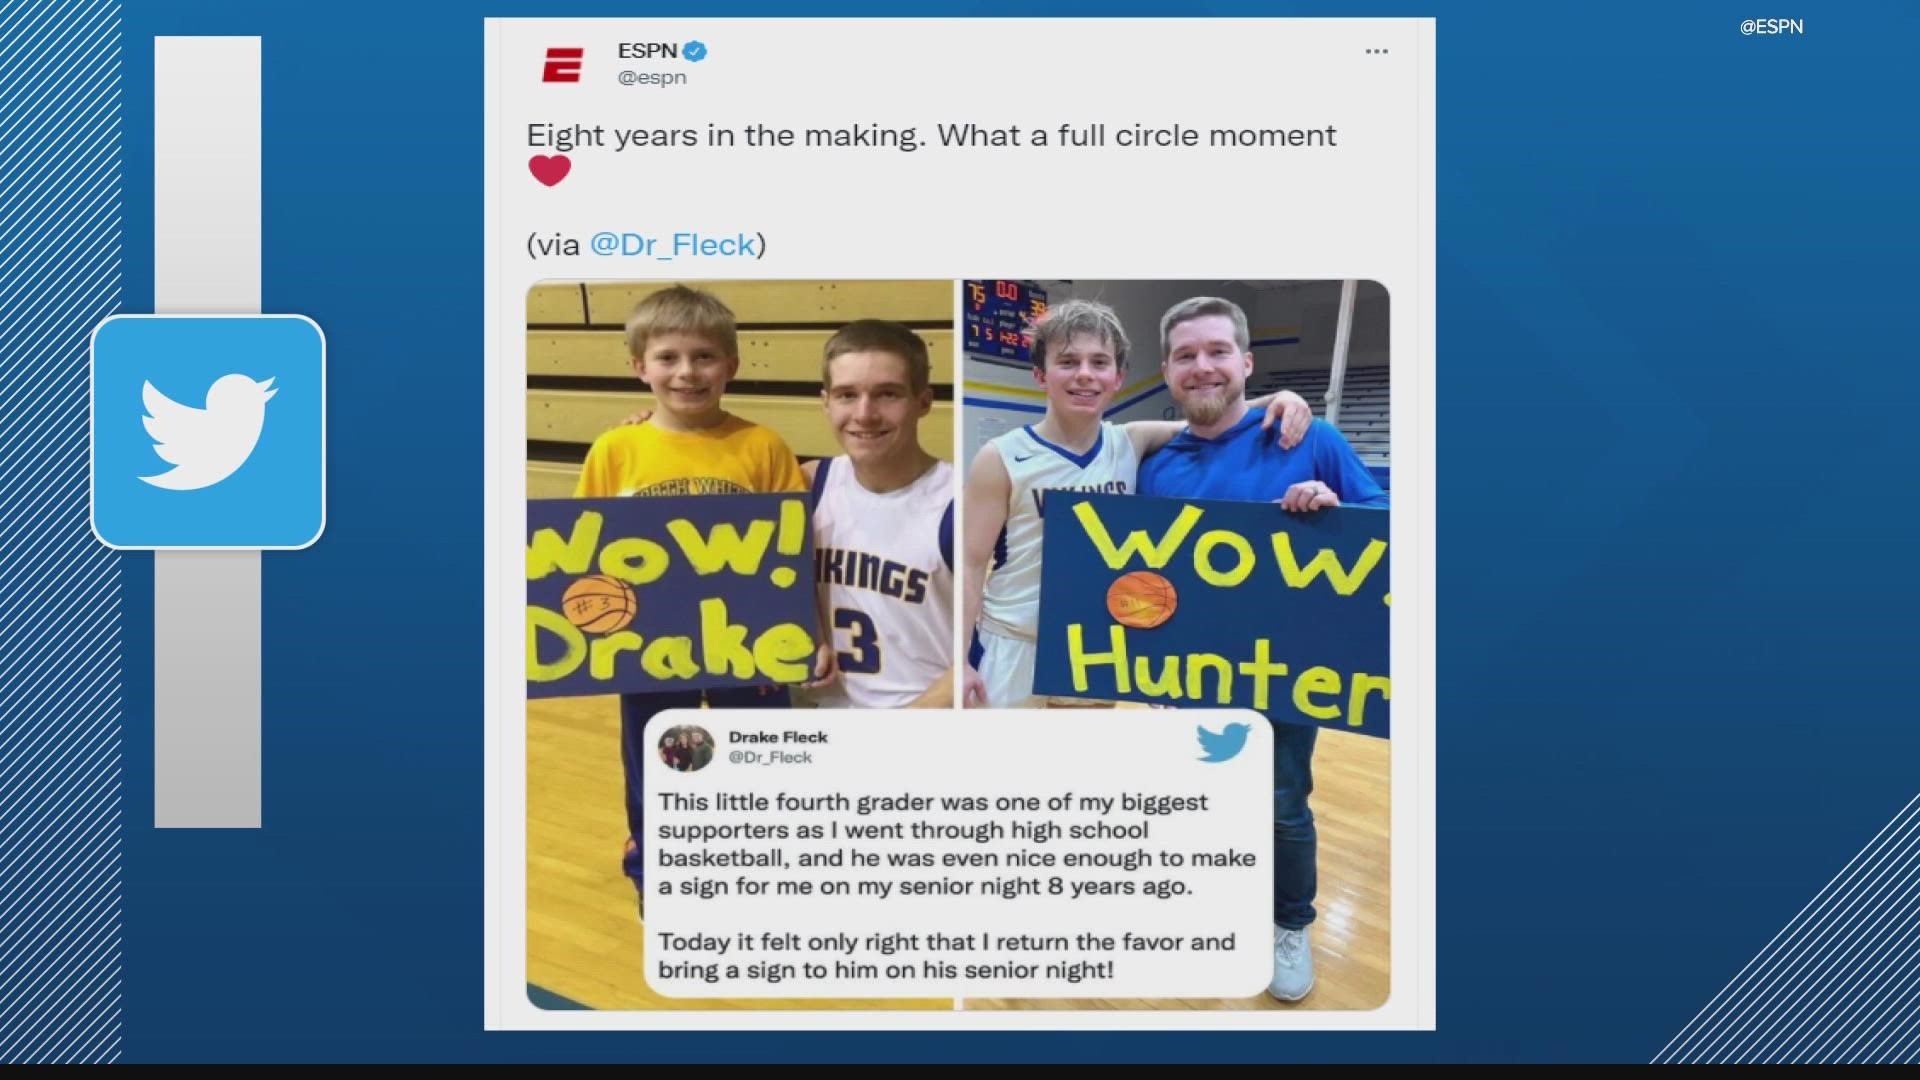 The eight-year comparison photo of two White County basketball players was picked up by ESPN.